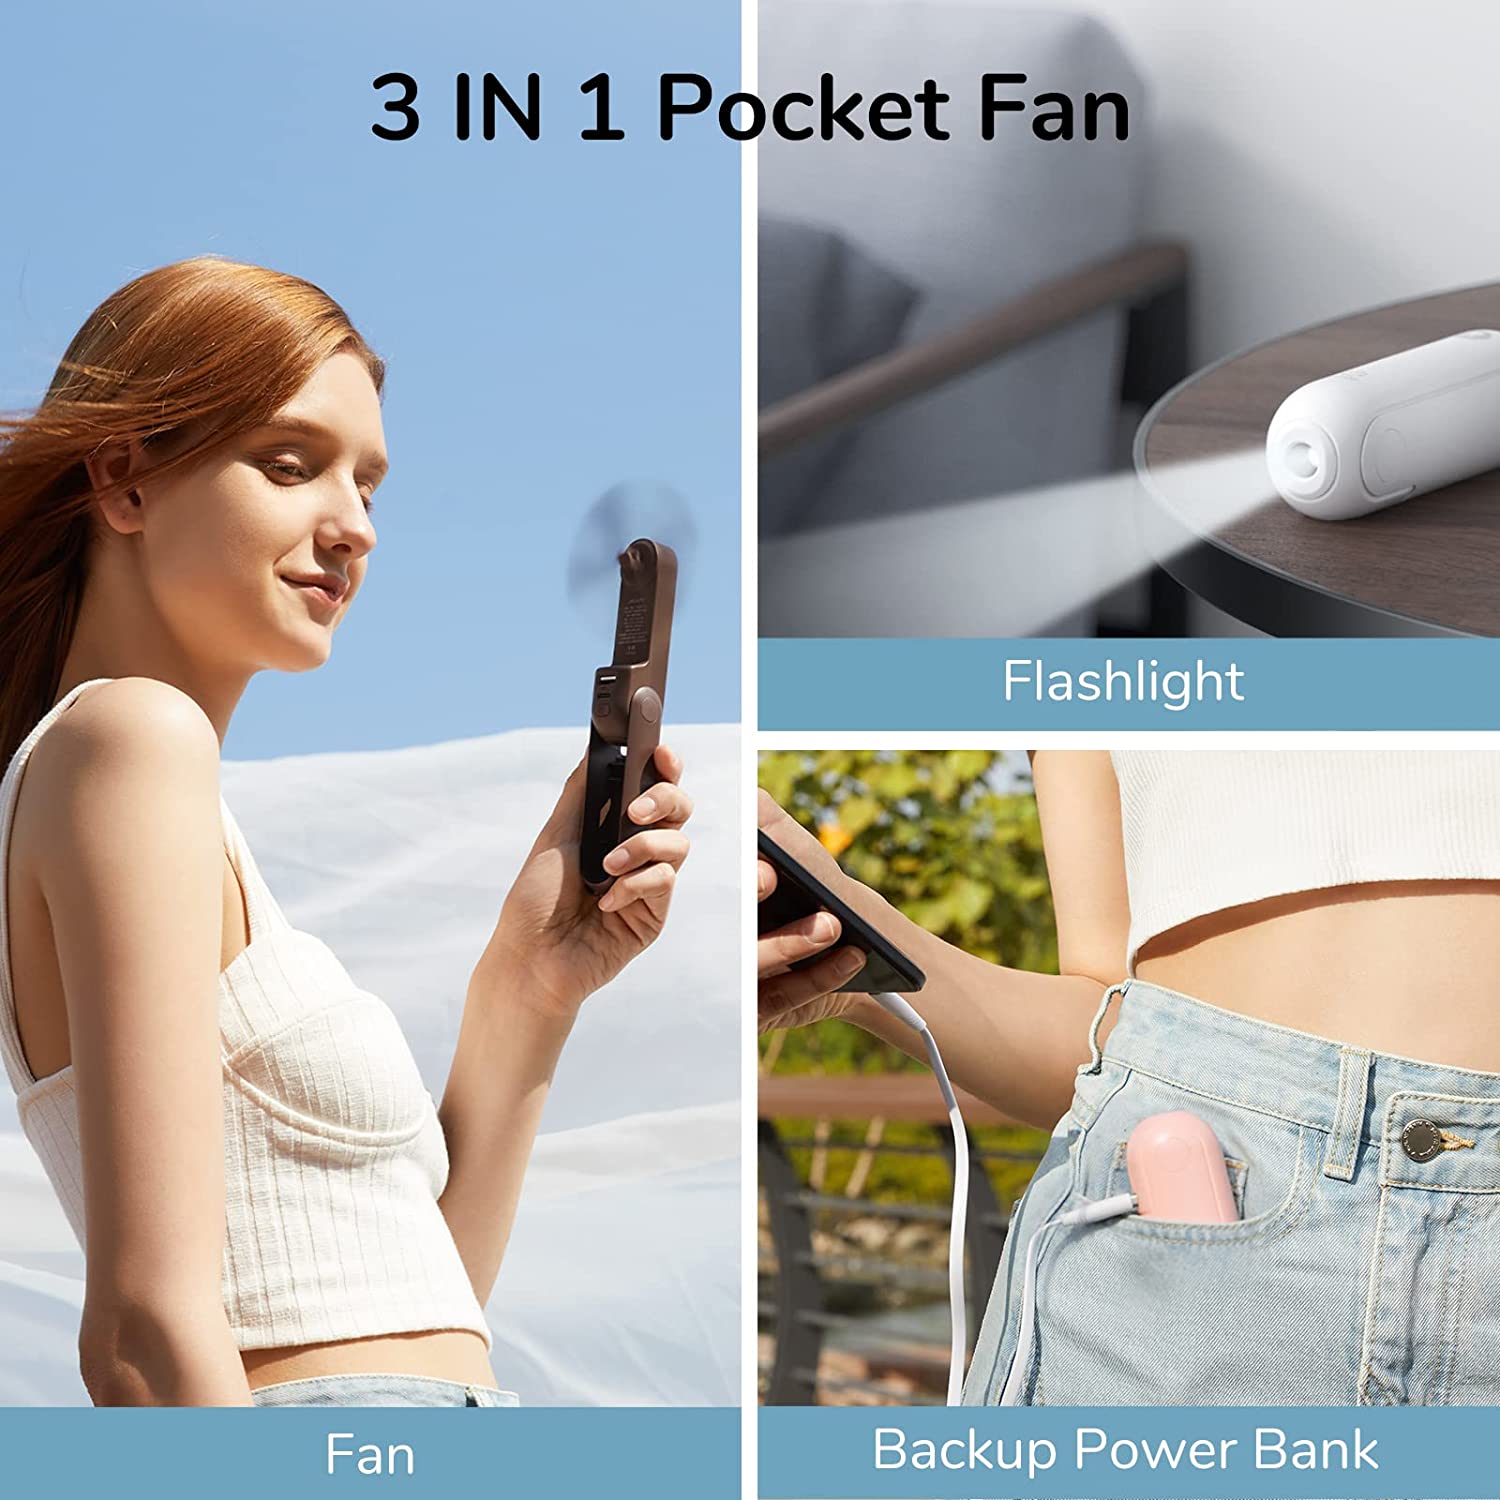 JISULIFE F8 Handheld Mini Fan Portable USB Rechargeable Fan with Power Bank and Flashlight Function